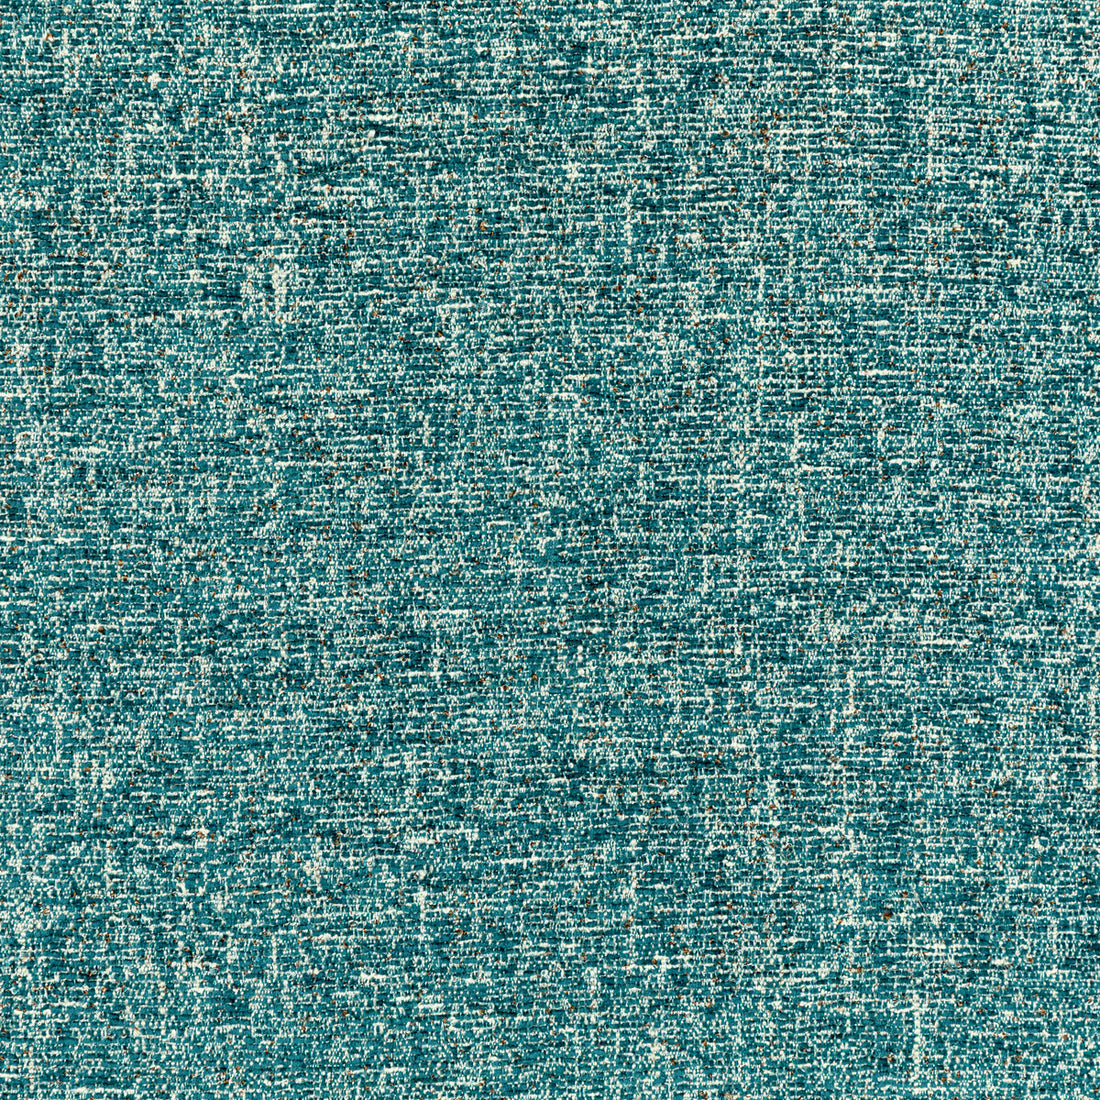 Leading Lady fabric in teal color - pattern 36109.3535.0 - by Kravet Couture in the Luxury Textures II collection